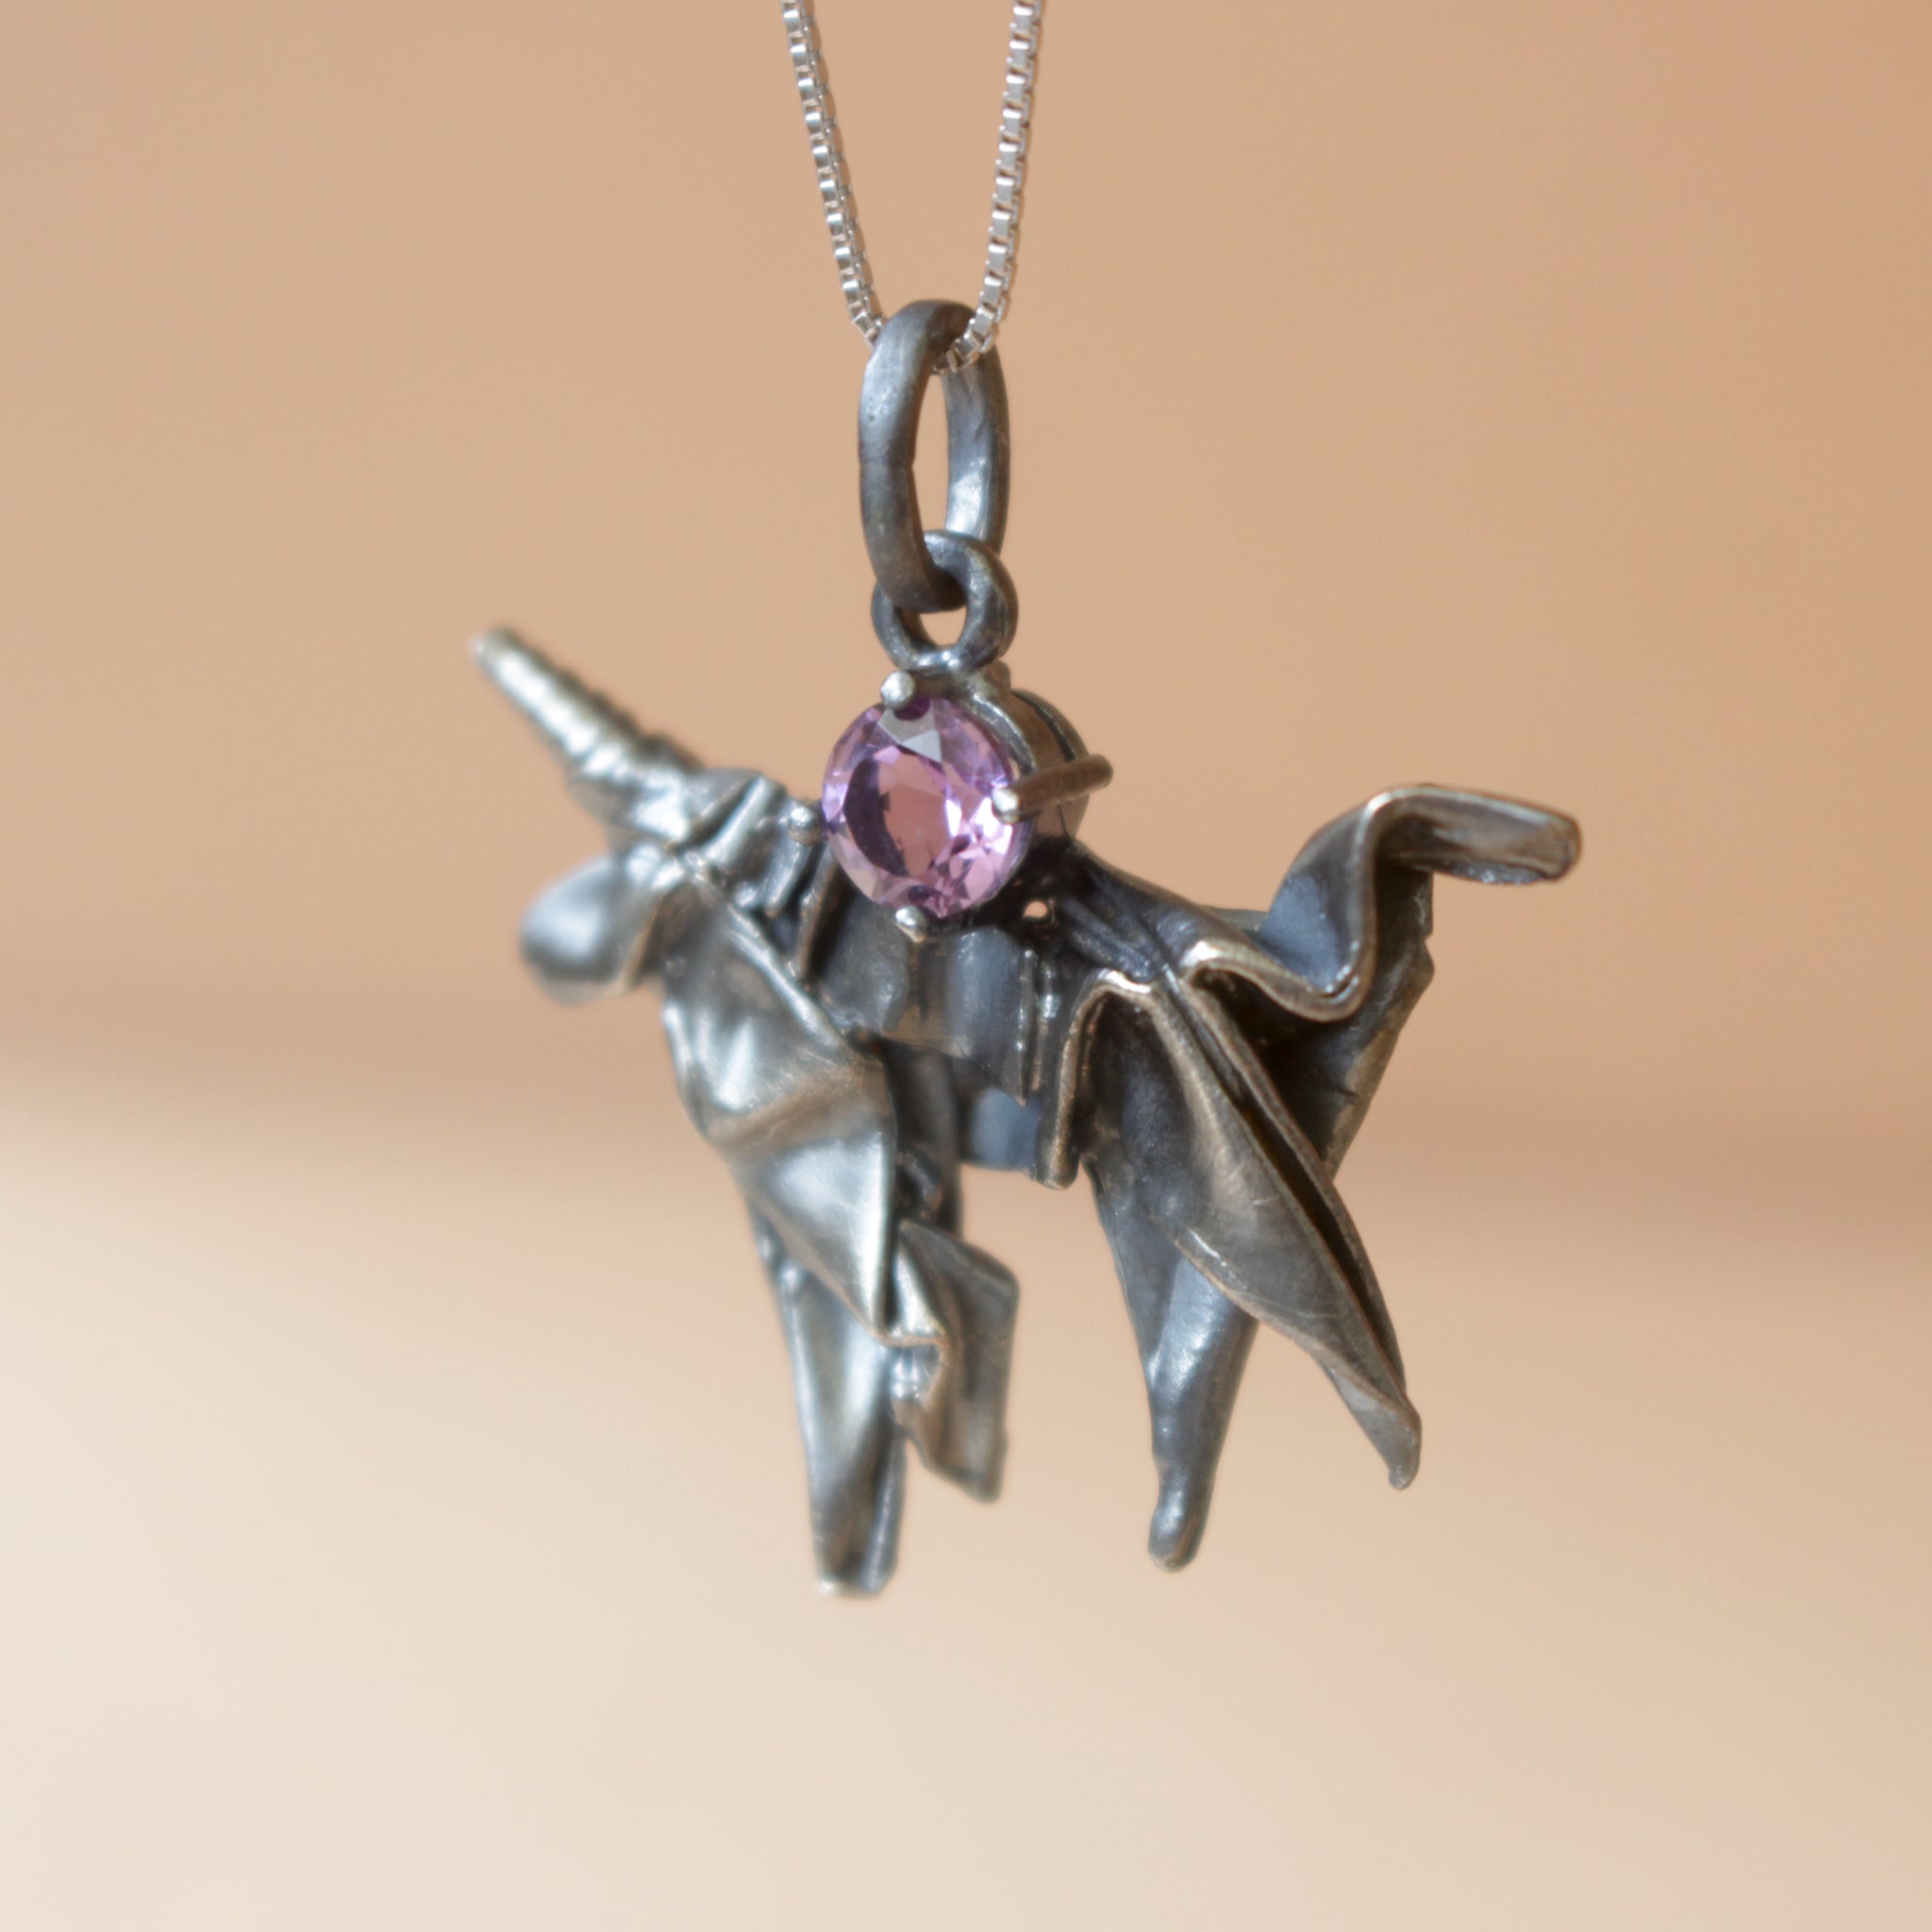 Black Silver Origami Unicorn Merry-go-round Necklace with Amethyst